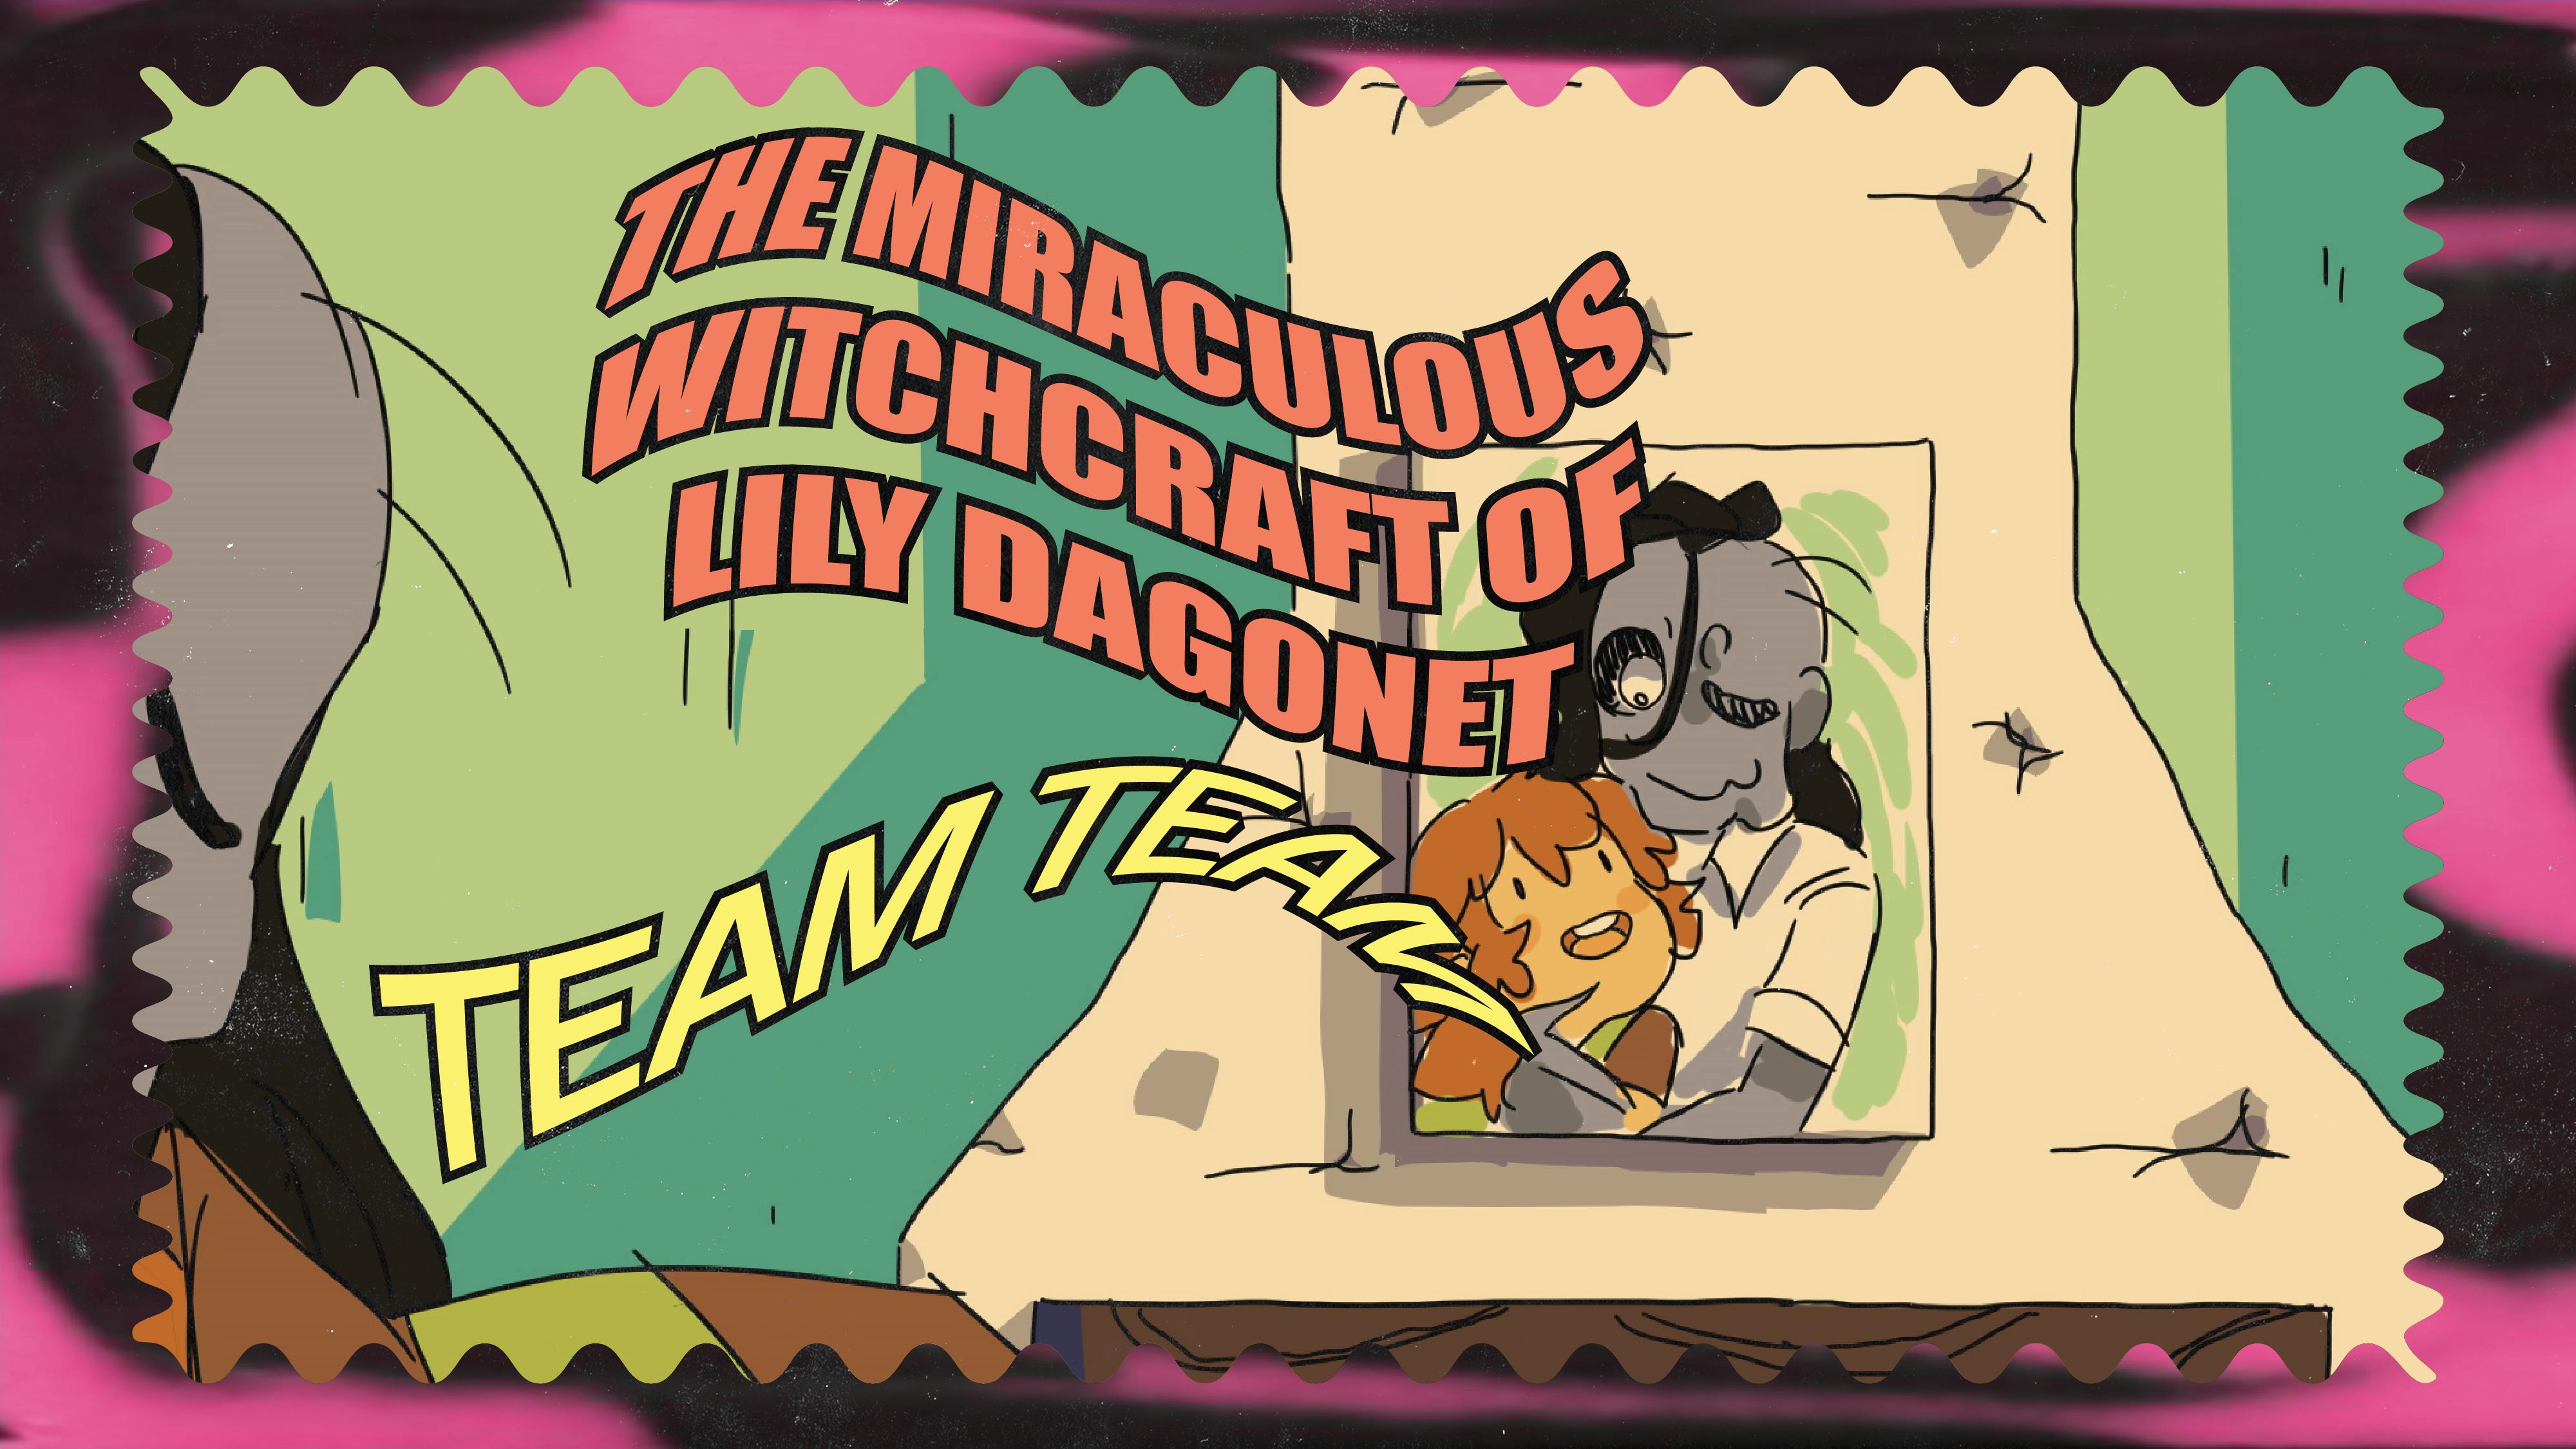 award slide from QAS's 2023 Lockdown screening. Screenshot and text depicts The Miraculous Witchcraft of Lily Dagonet by Team Team